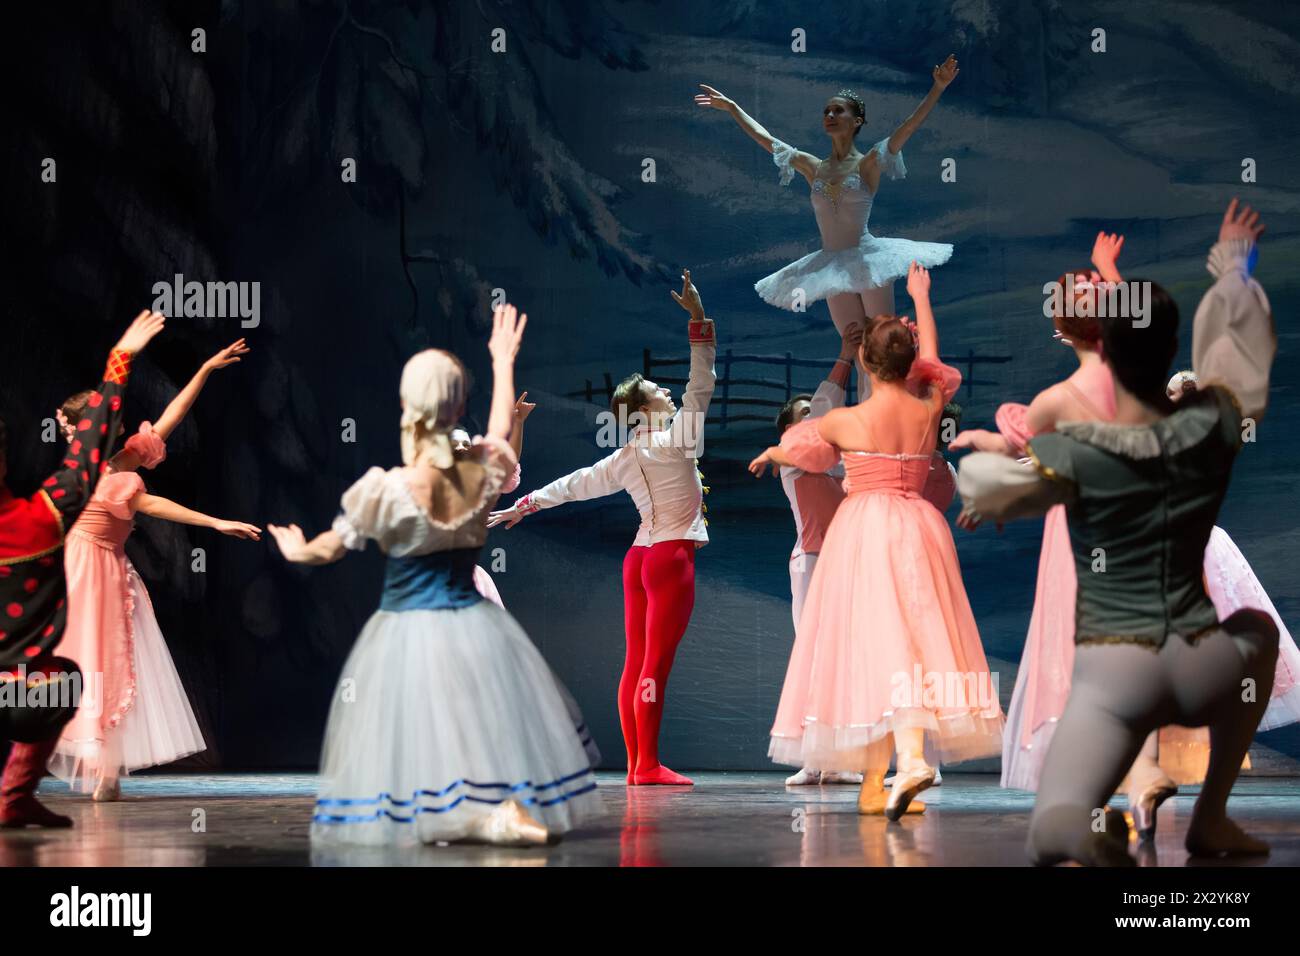 MOSCOW - DEC 29: Christmas magic-fantasy ballet The Nutcracker in Barvikha Luxury Village on December 29, 2012 in Moscow, Russia. Stock Photo